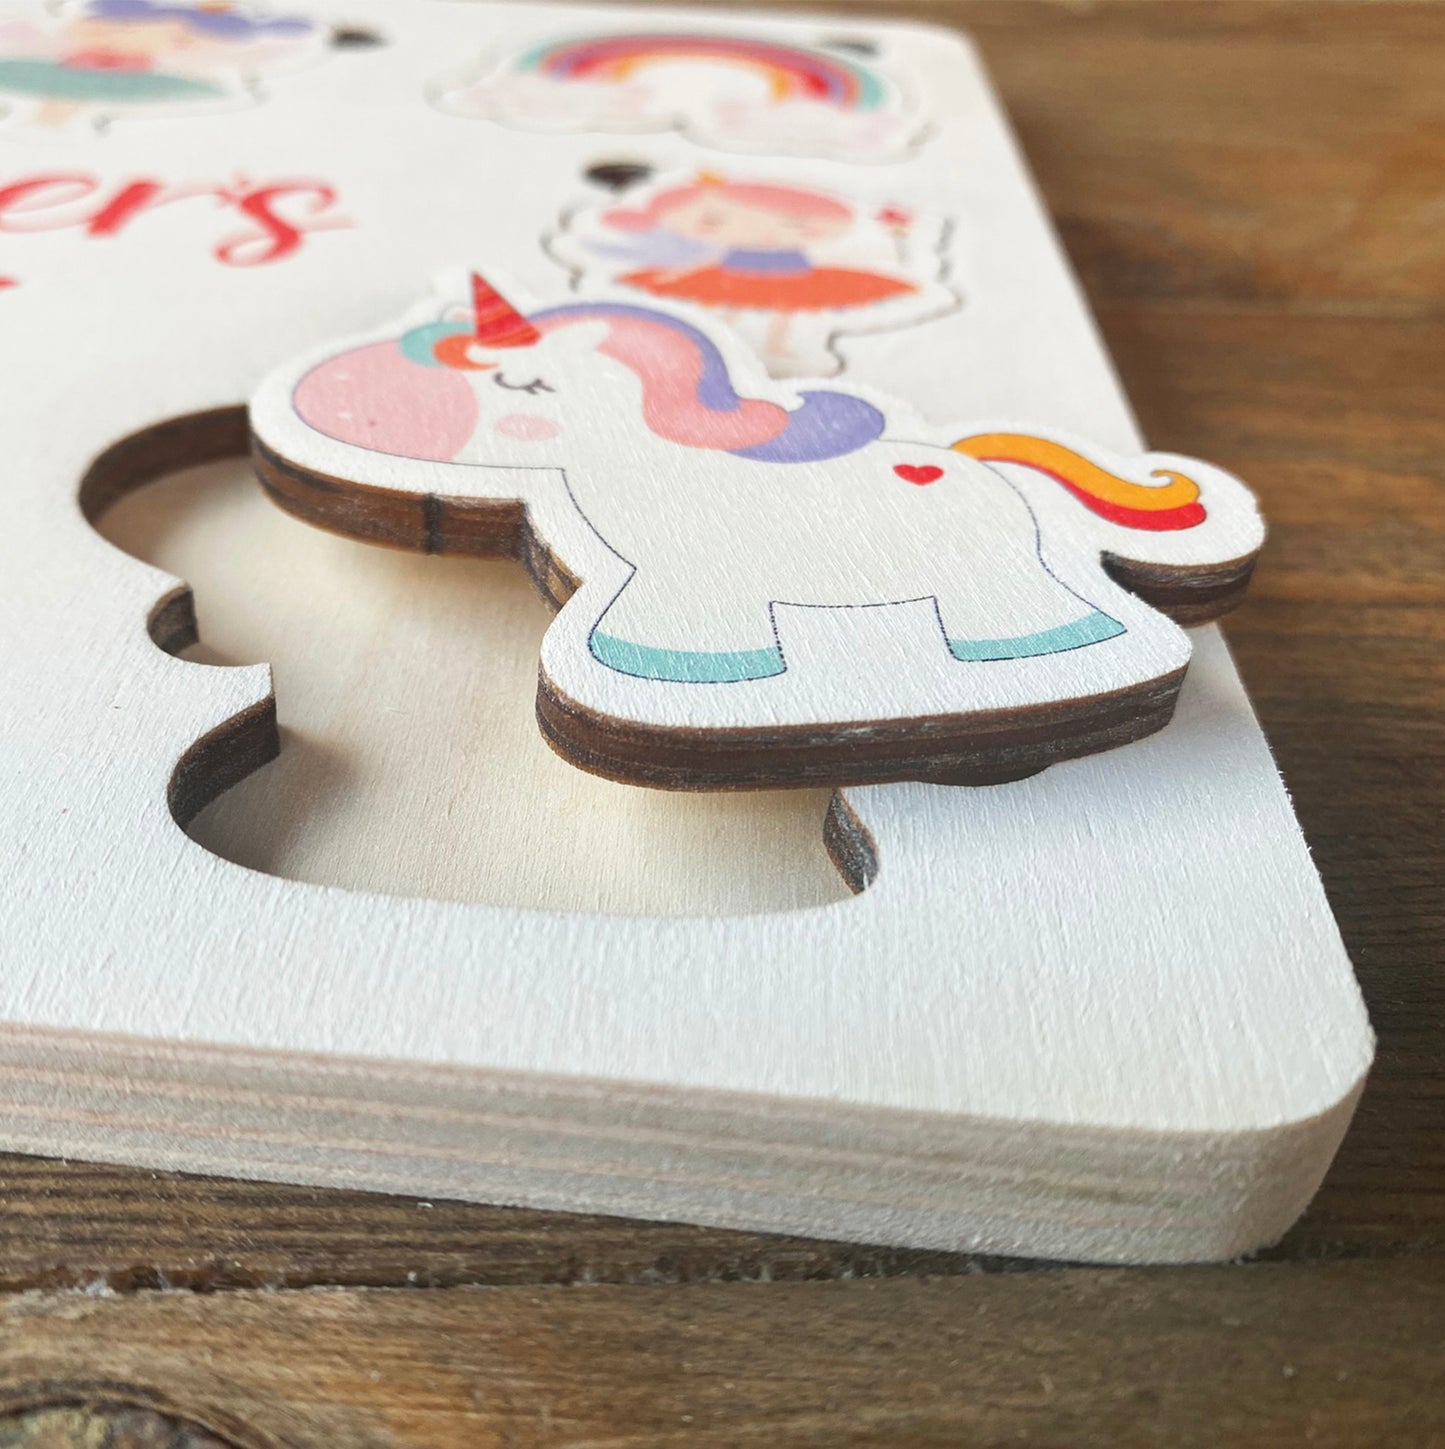 Custom Wooden Puzzle Personalized with Child's Name - Princess Fairy Themed